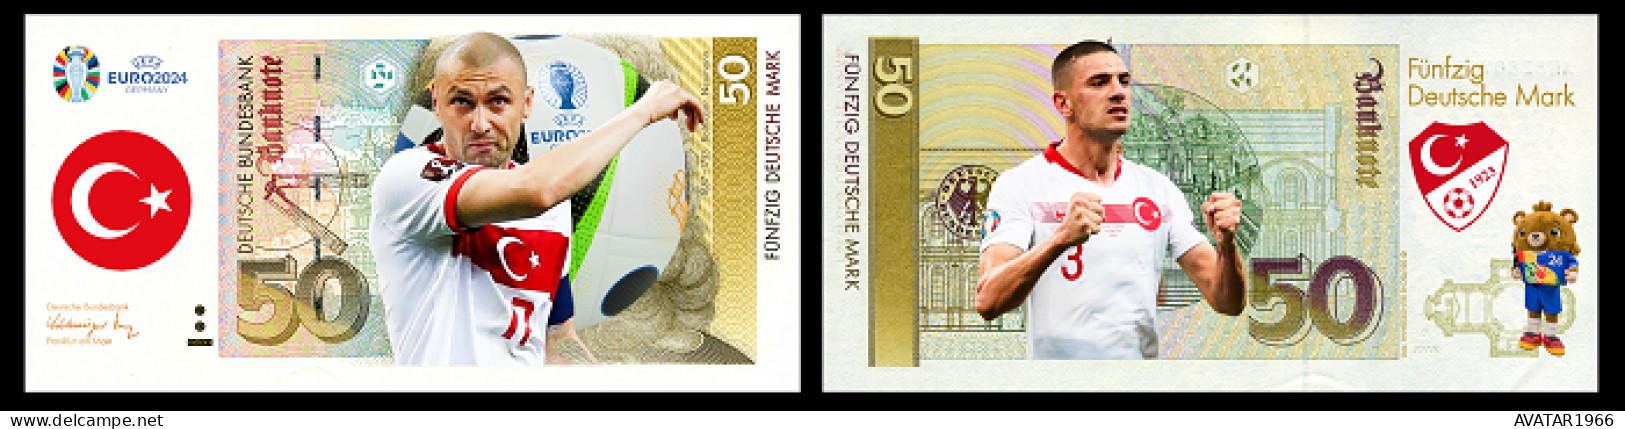 UEFA European Football Championship 2024 Qualified Country Turkey 8 Pieces Germany Fantasy Paper Money - [15] Commemoratives & Special Issues